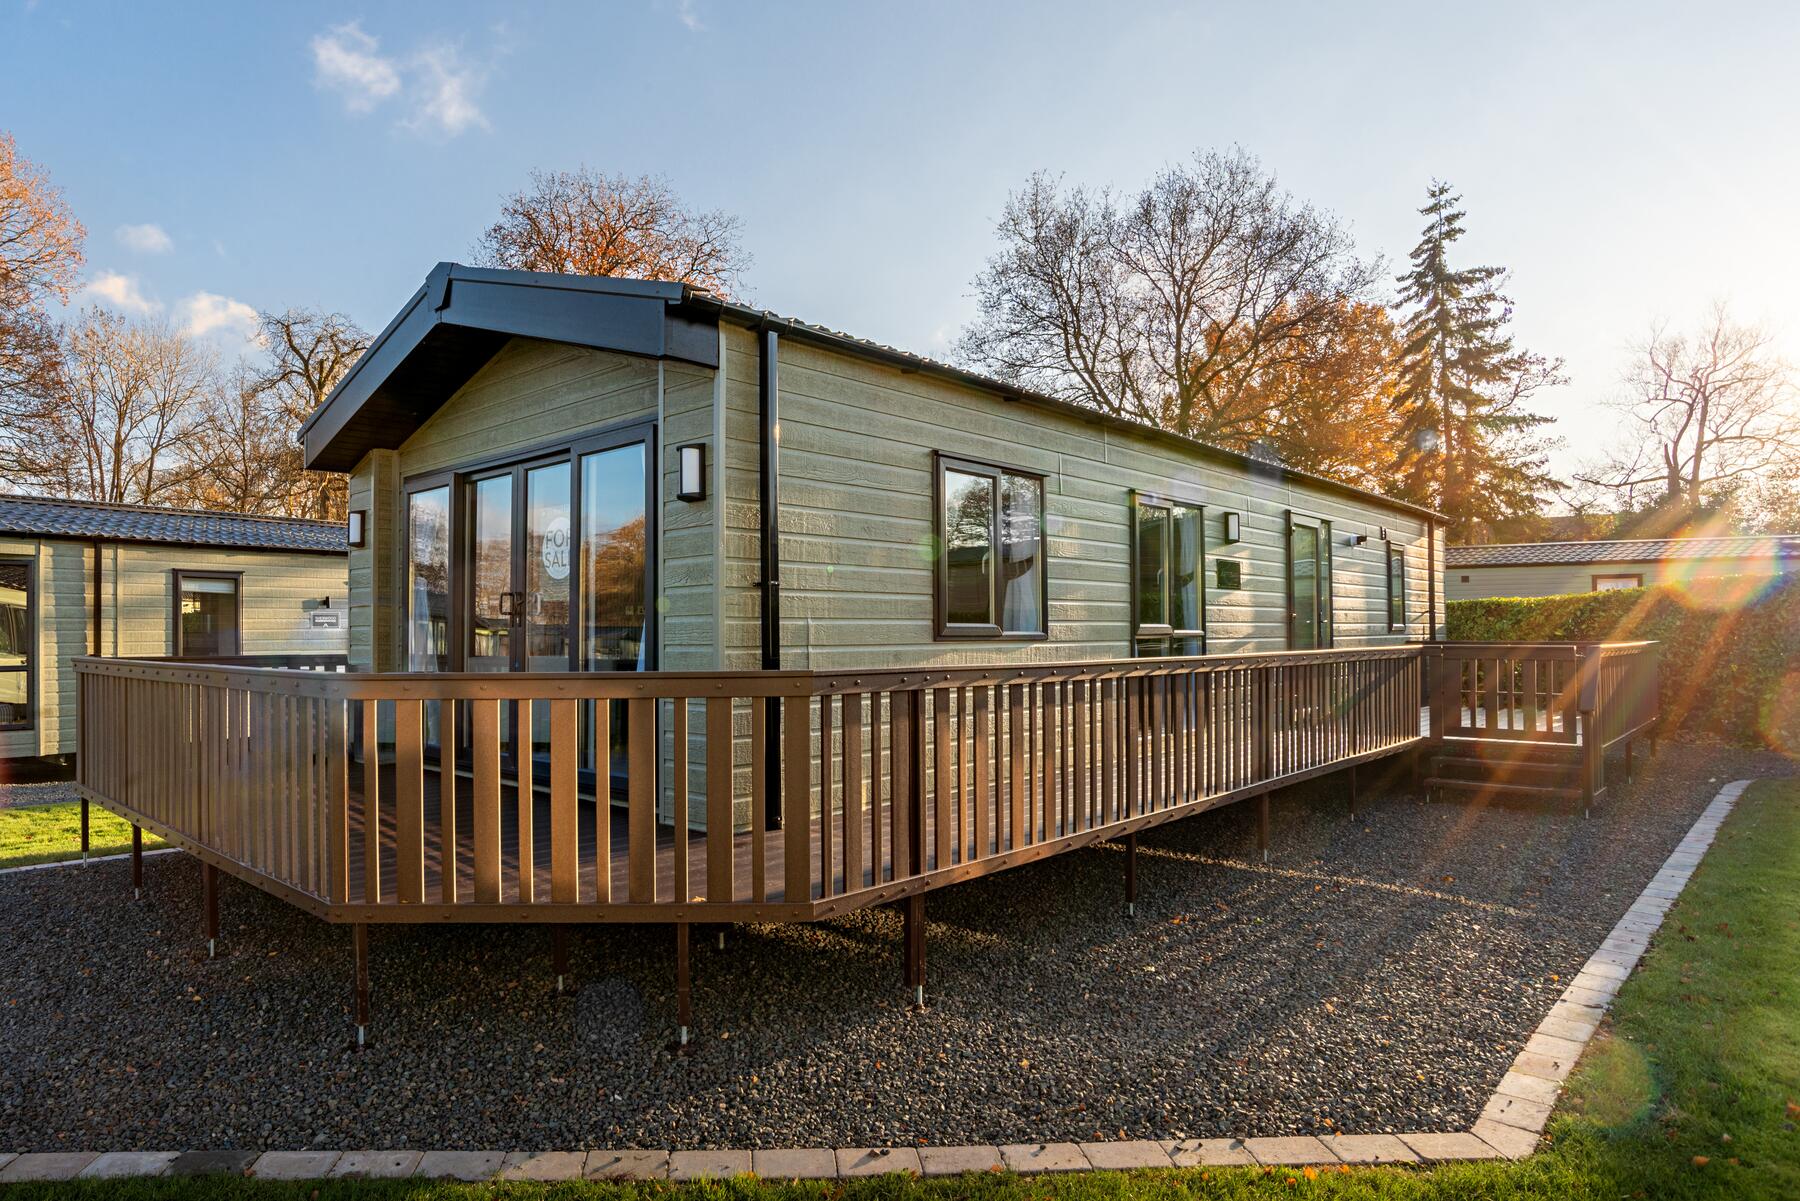 Regal Artisan Lodge - Lovely spacious home with a large wrap around decking.